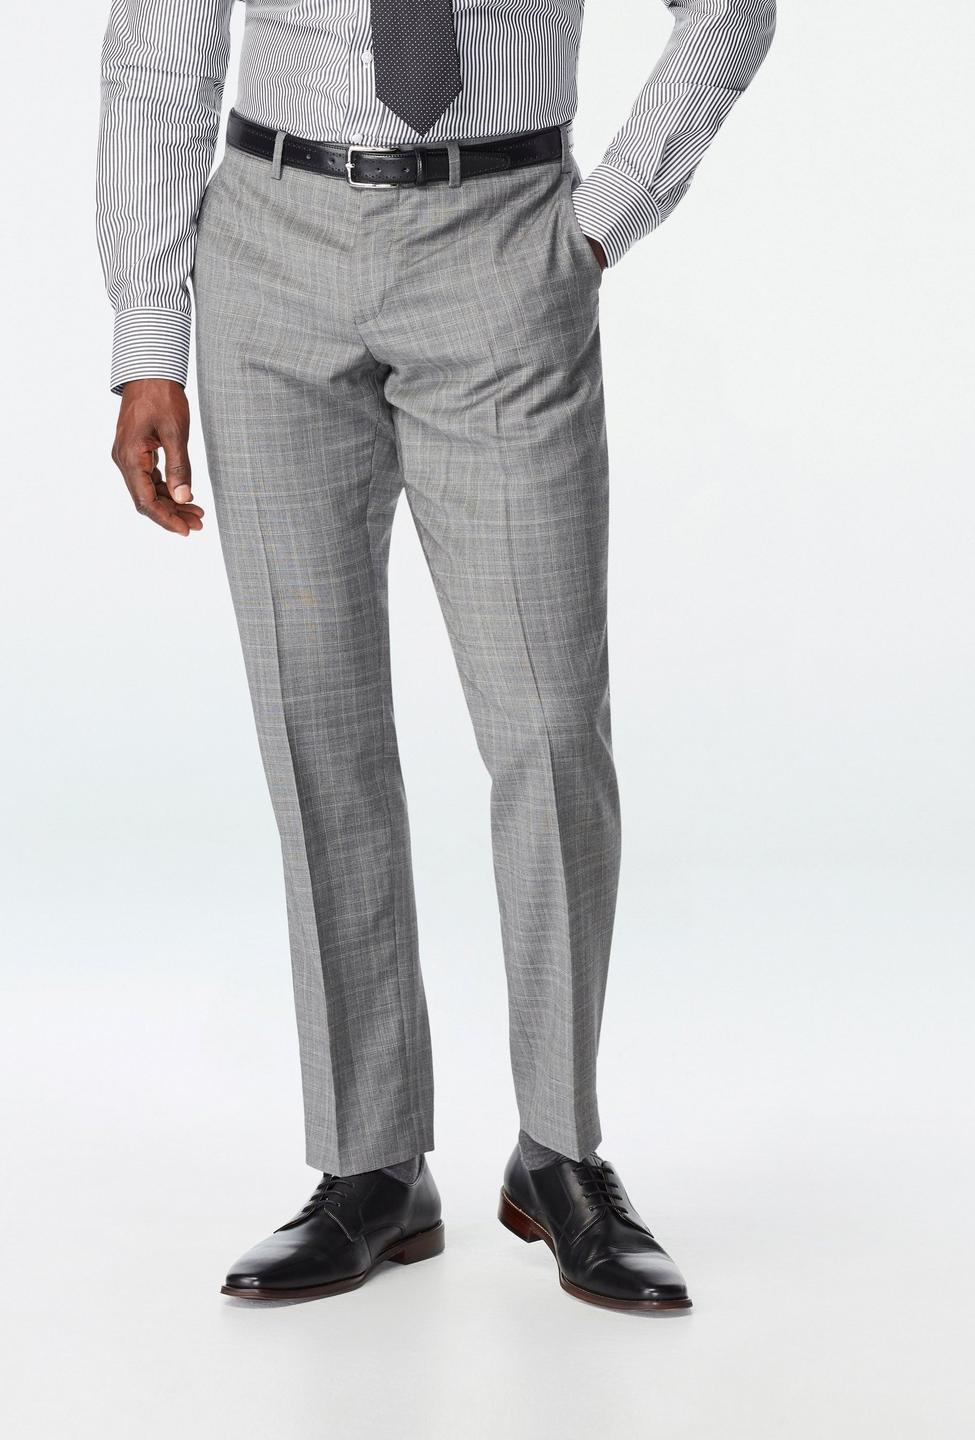 Gray pants - Harrogate Checked Design from Luxury Indochino Collection